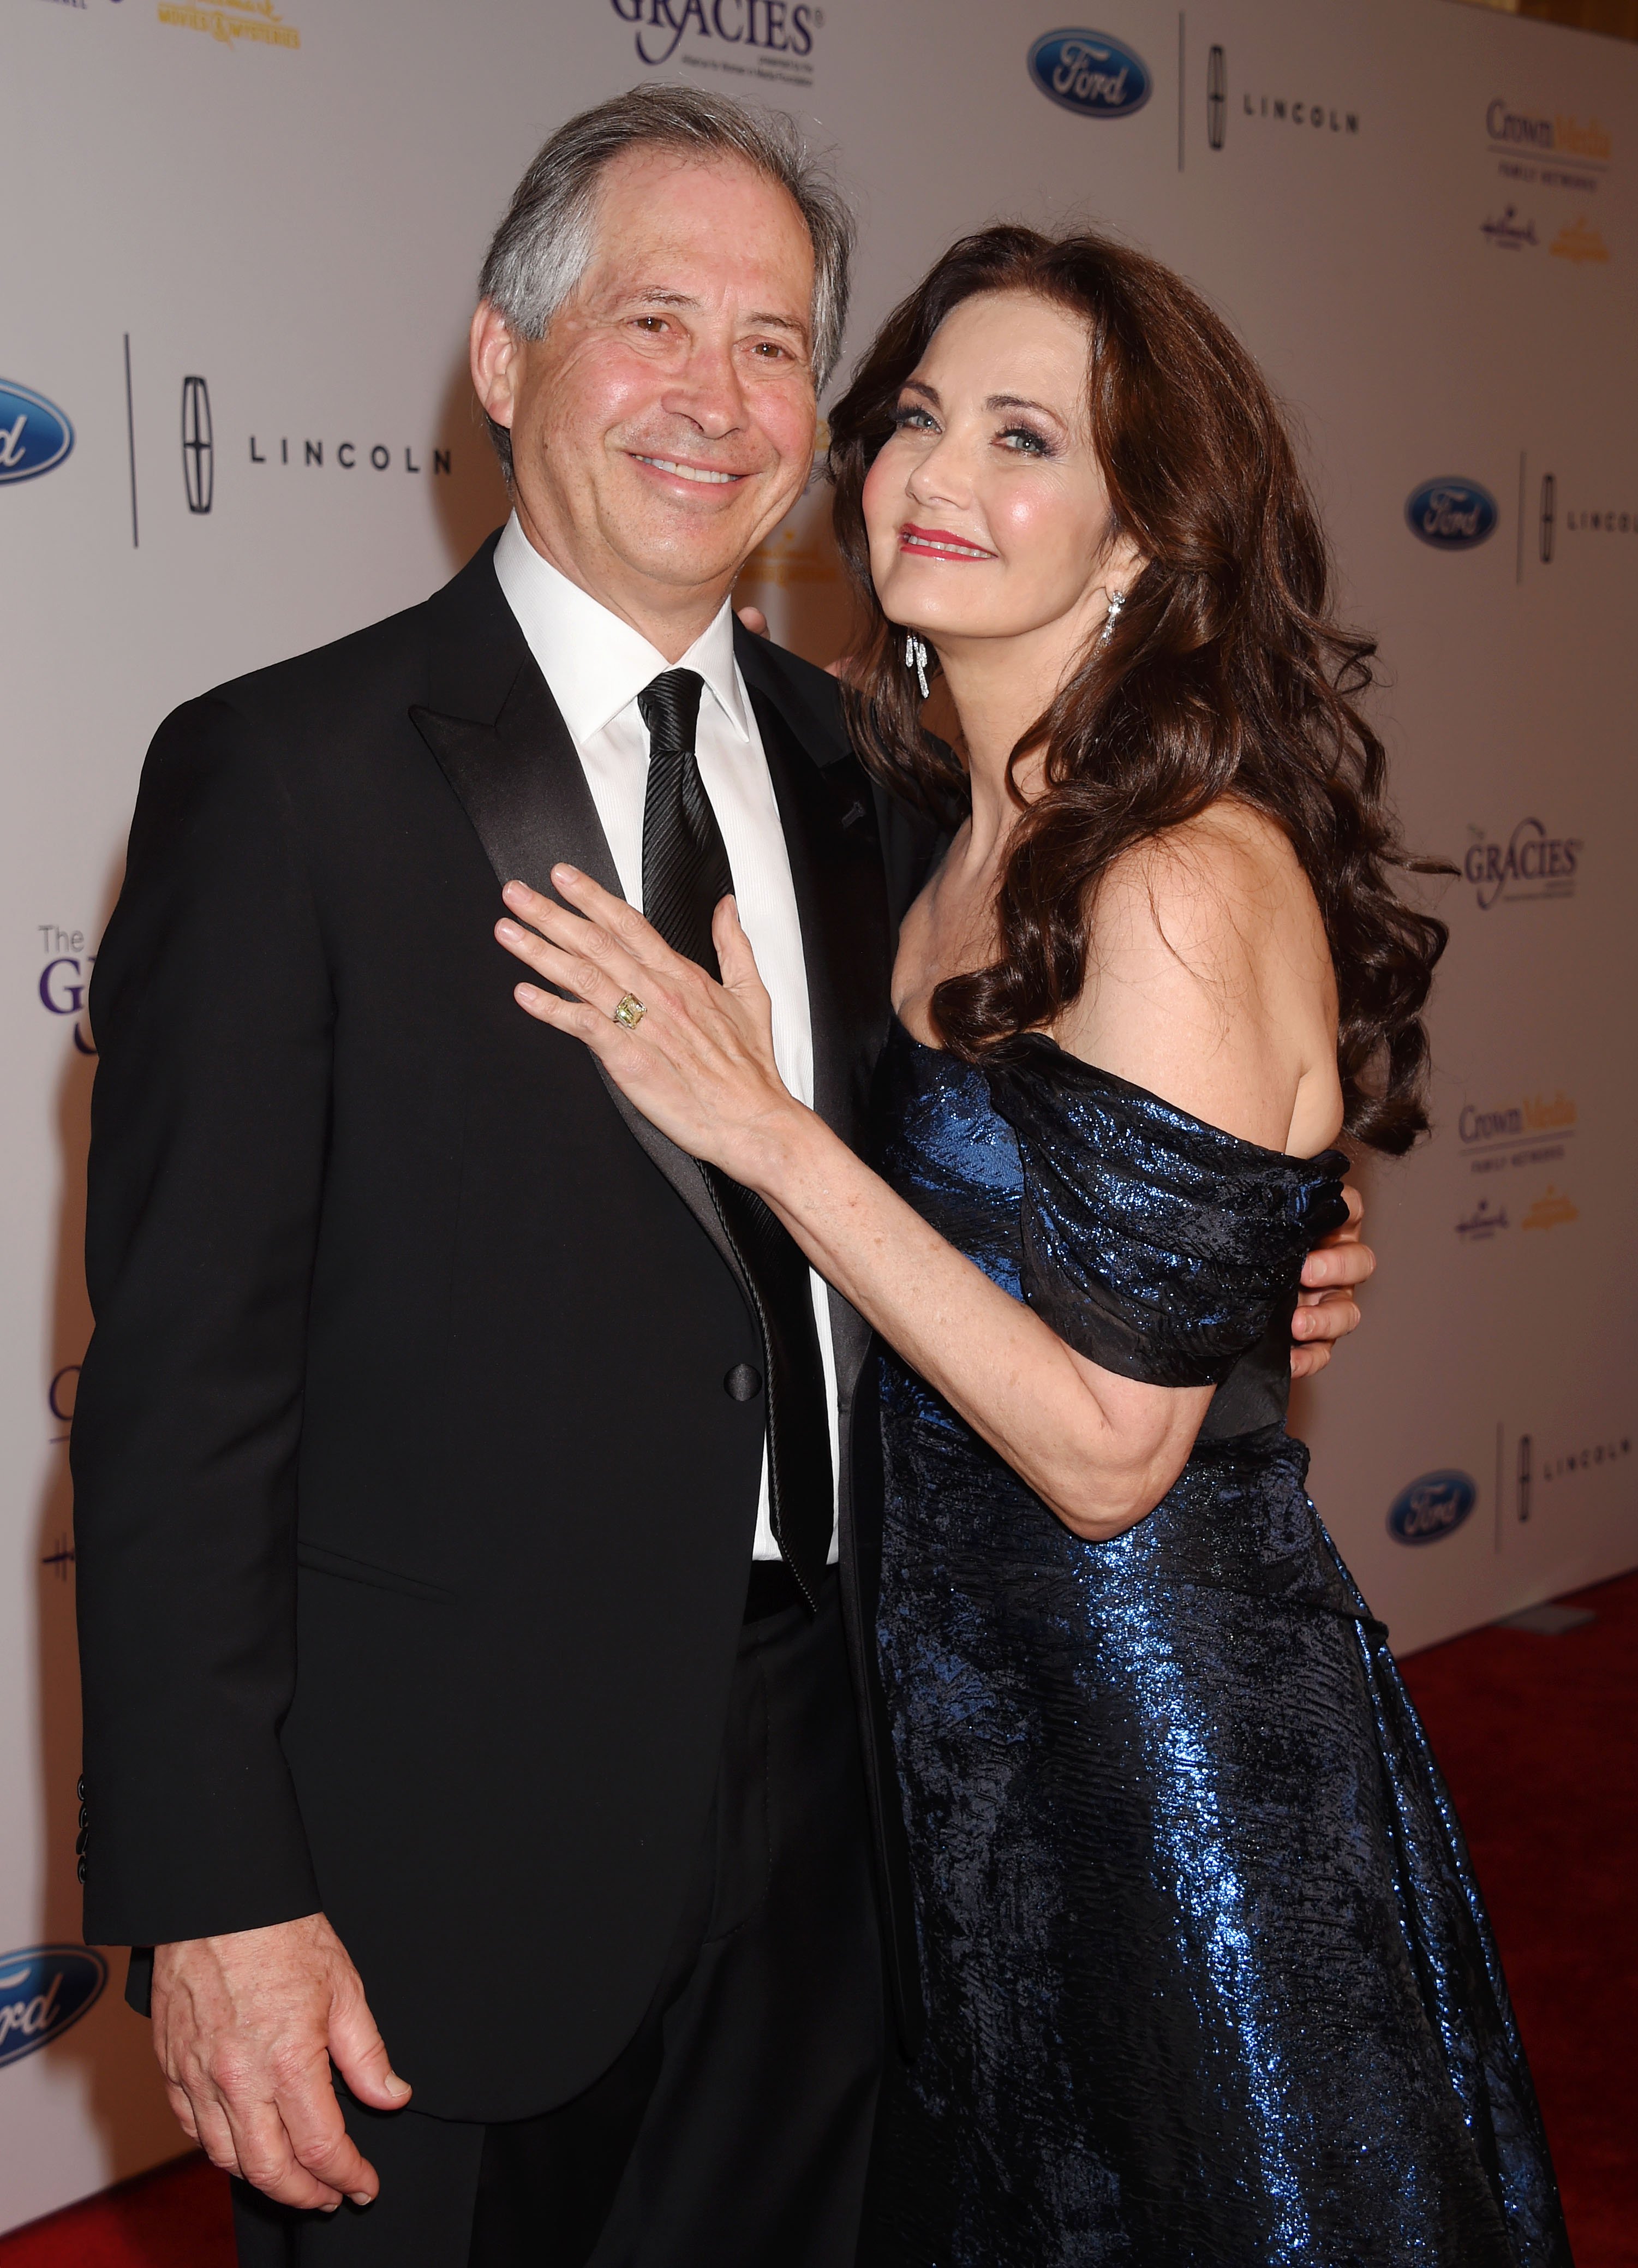 Lynda Carter and spouse/businessman Robert A. Altman attend the 41st Annual Gracie Awards at Regent Beverly Wilshire Hotel on May 24, 2016 in Beverly Hills, California | Photo: Getty Images